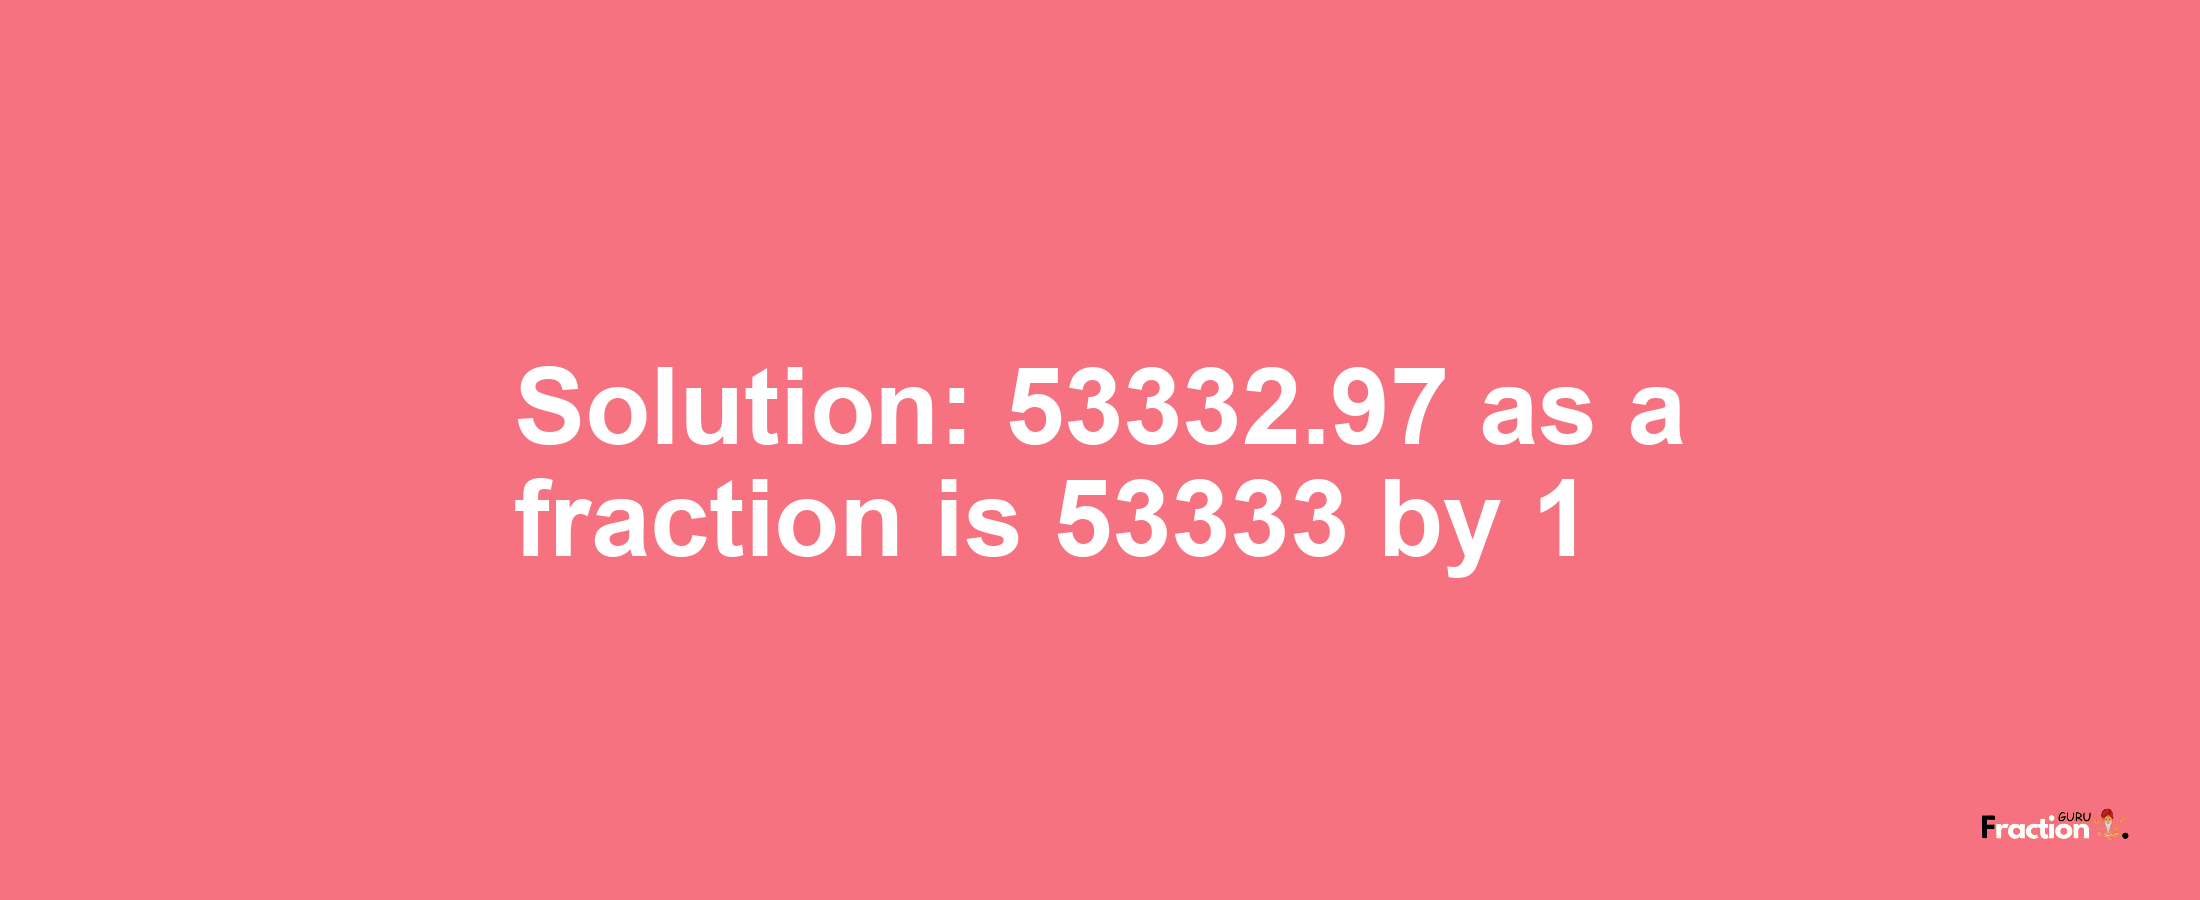 Solution:53332.97 as a fraction is 53333/1